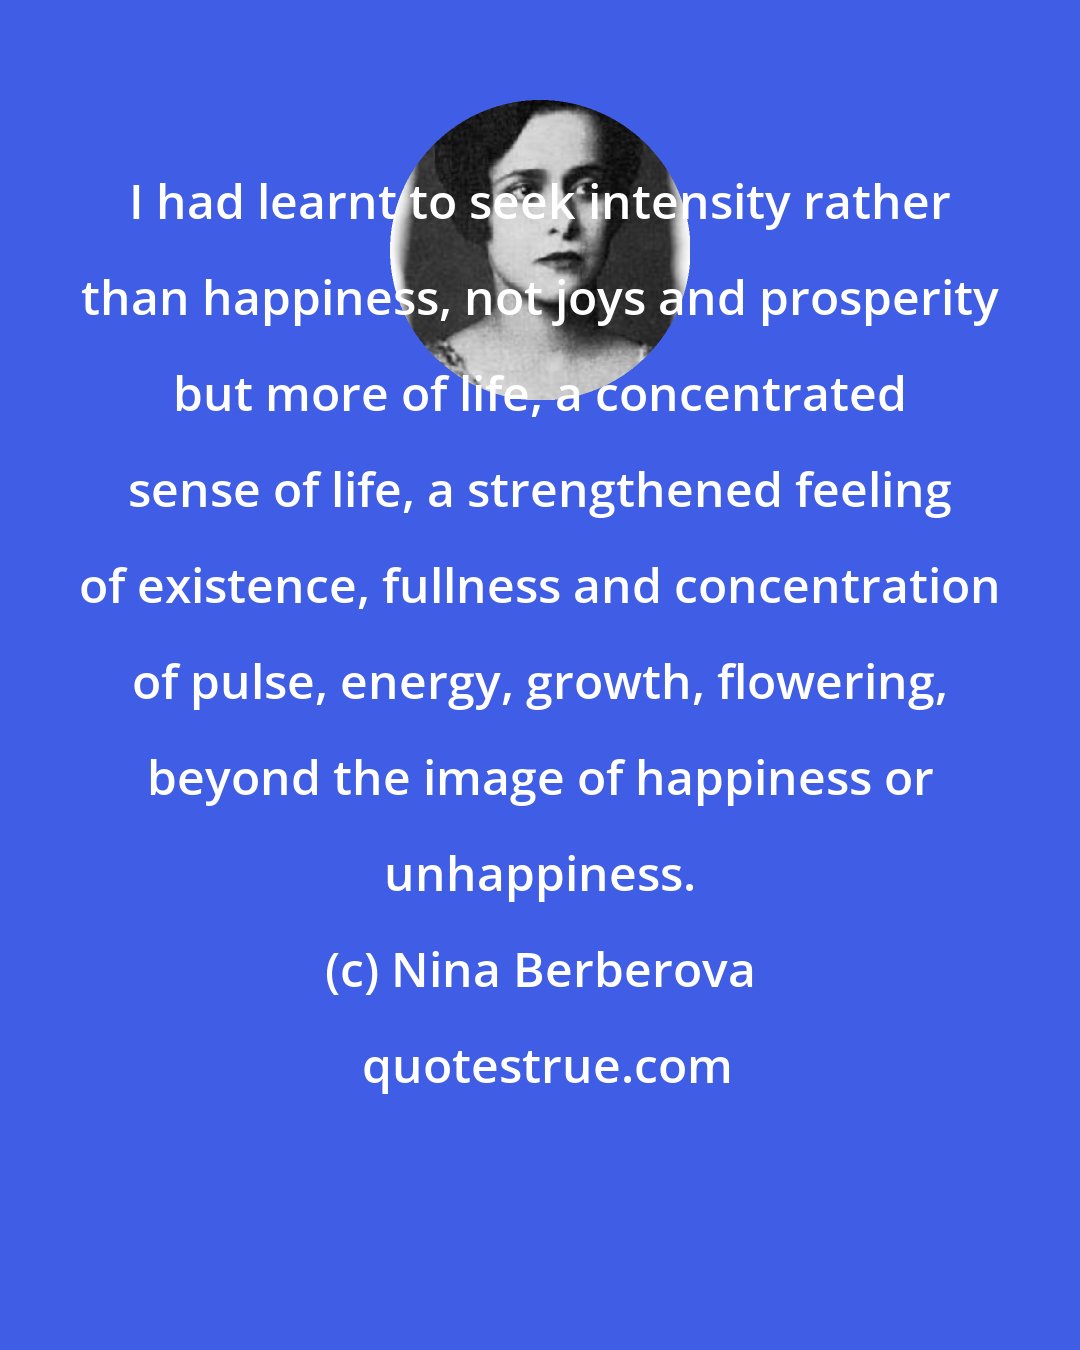 Nina Berberova: I had learnt to seek intensity rather than happiness, not joys and prosperity but more of life, a concentrated sense of life, a strengthened feeling of existence, fullness and concentration of pulse, energy, growth, flowering, beyond the image of happiness or unhappiness.